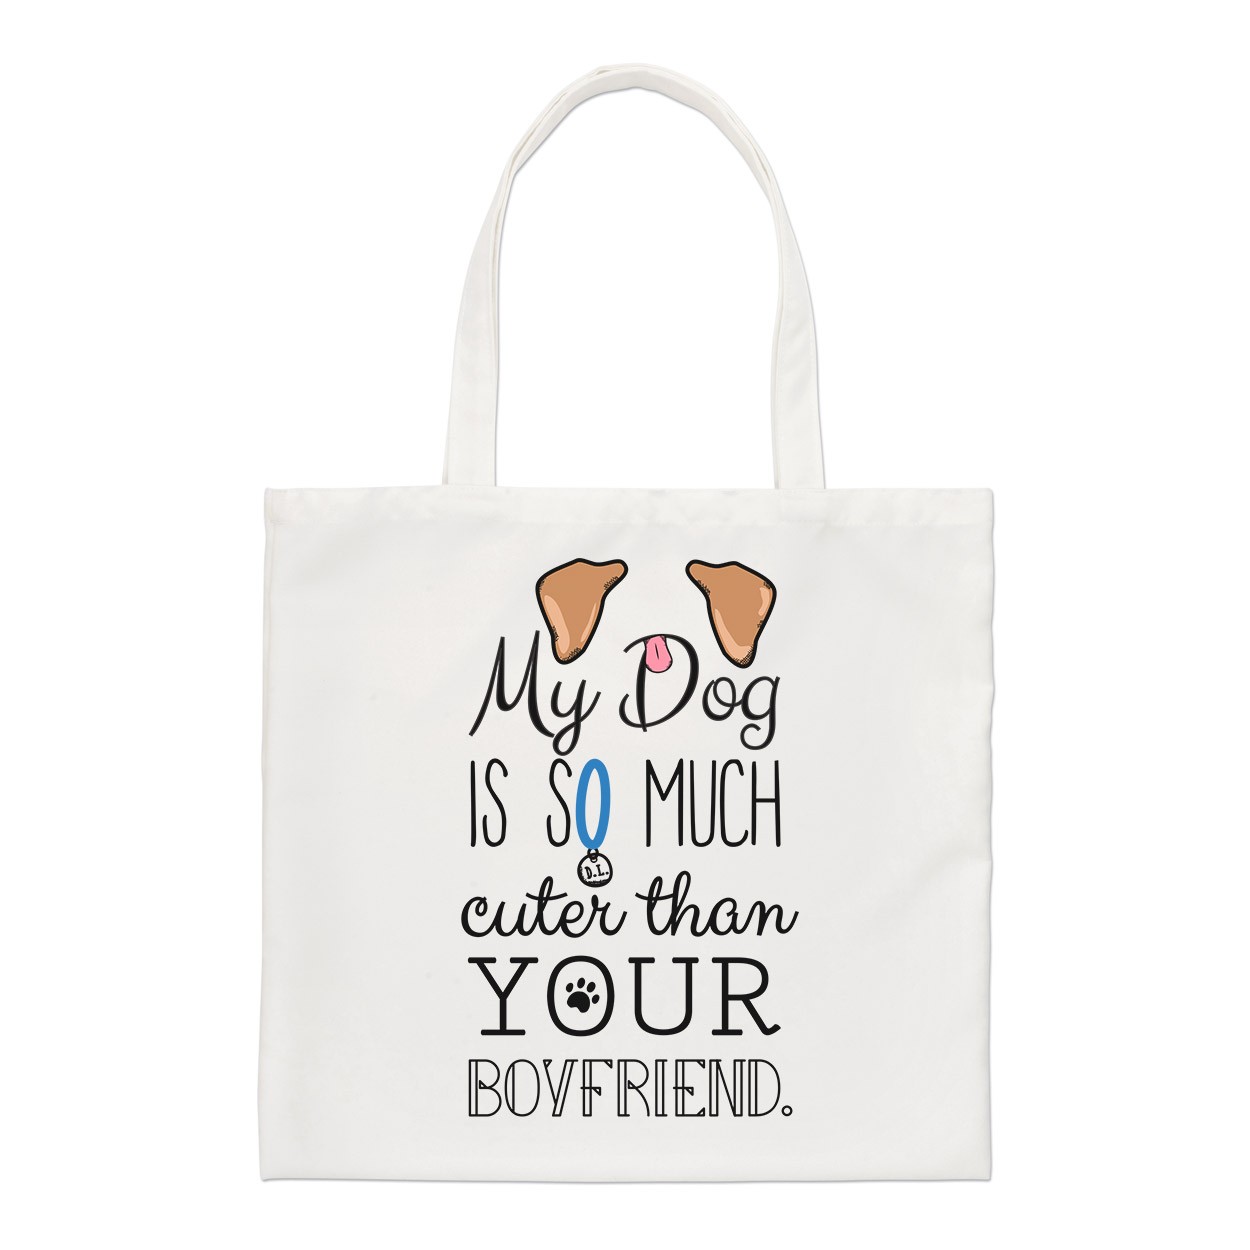 My Dog Is Cuter Than Your Boyfriend Brown Ears Regular Tote Bag